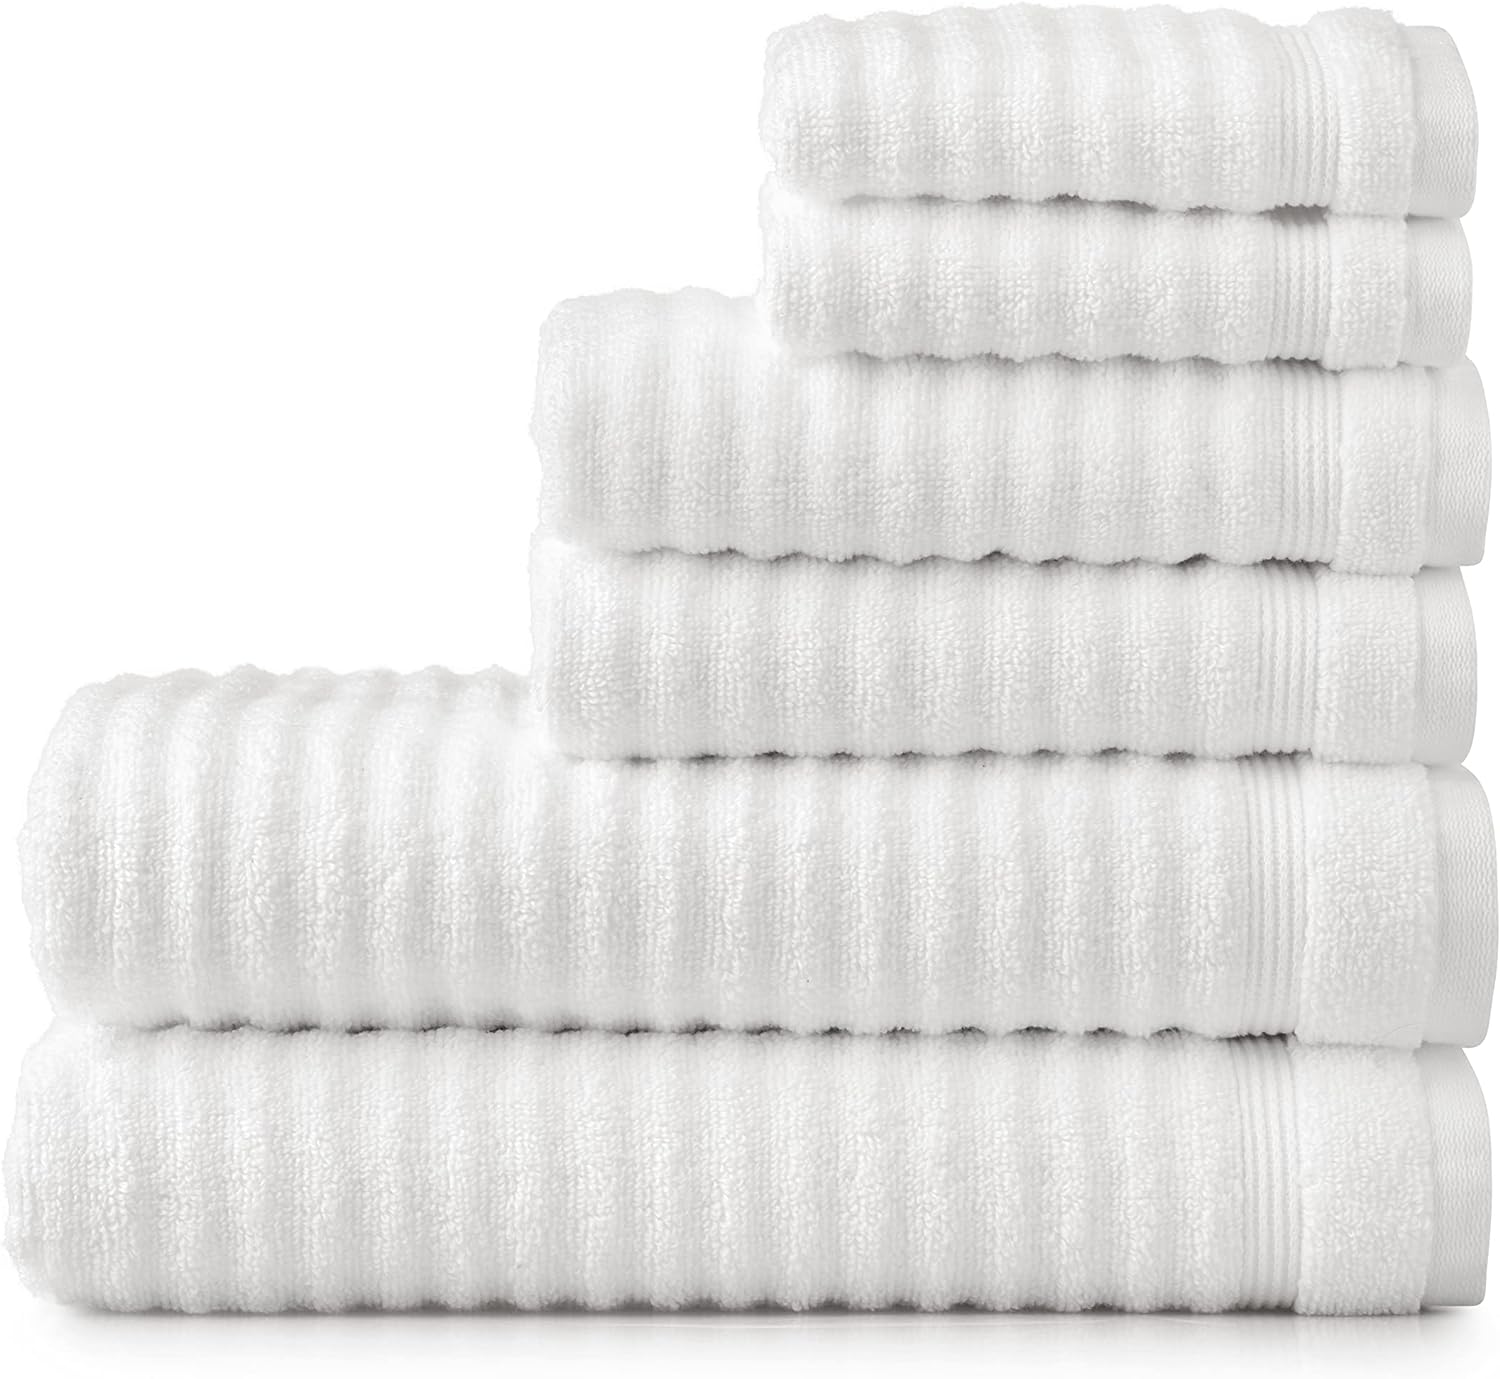 Everything You Need to Know About Choosing Towels - Martha Stewart